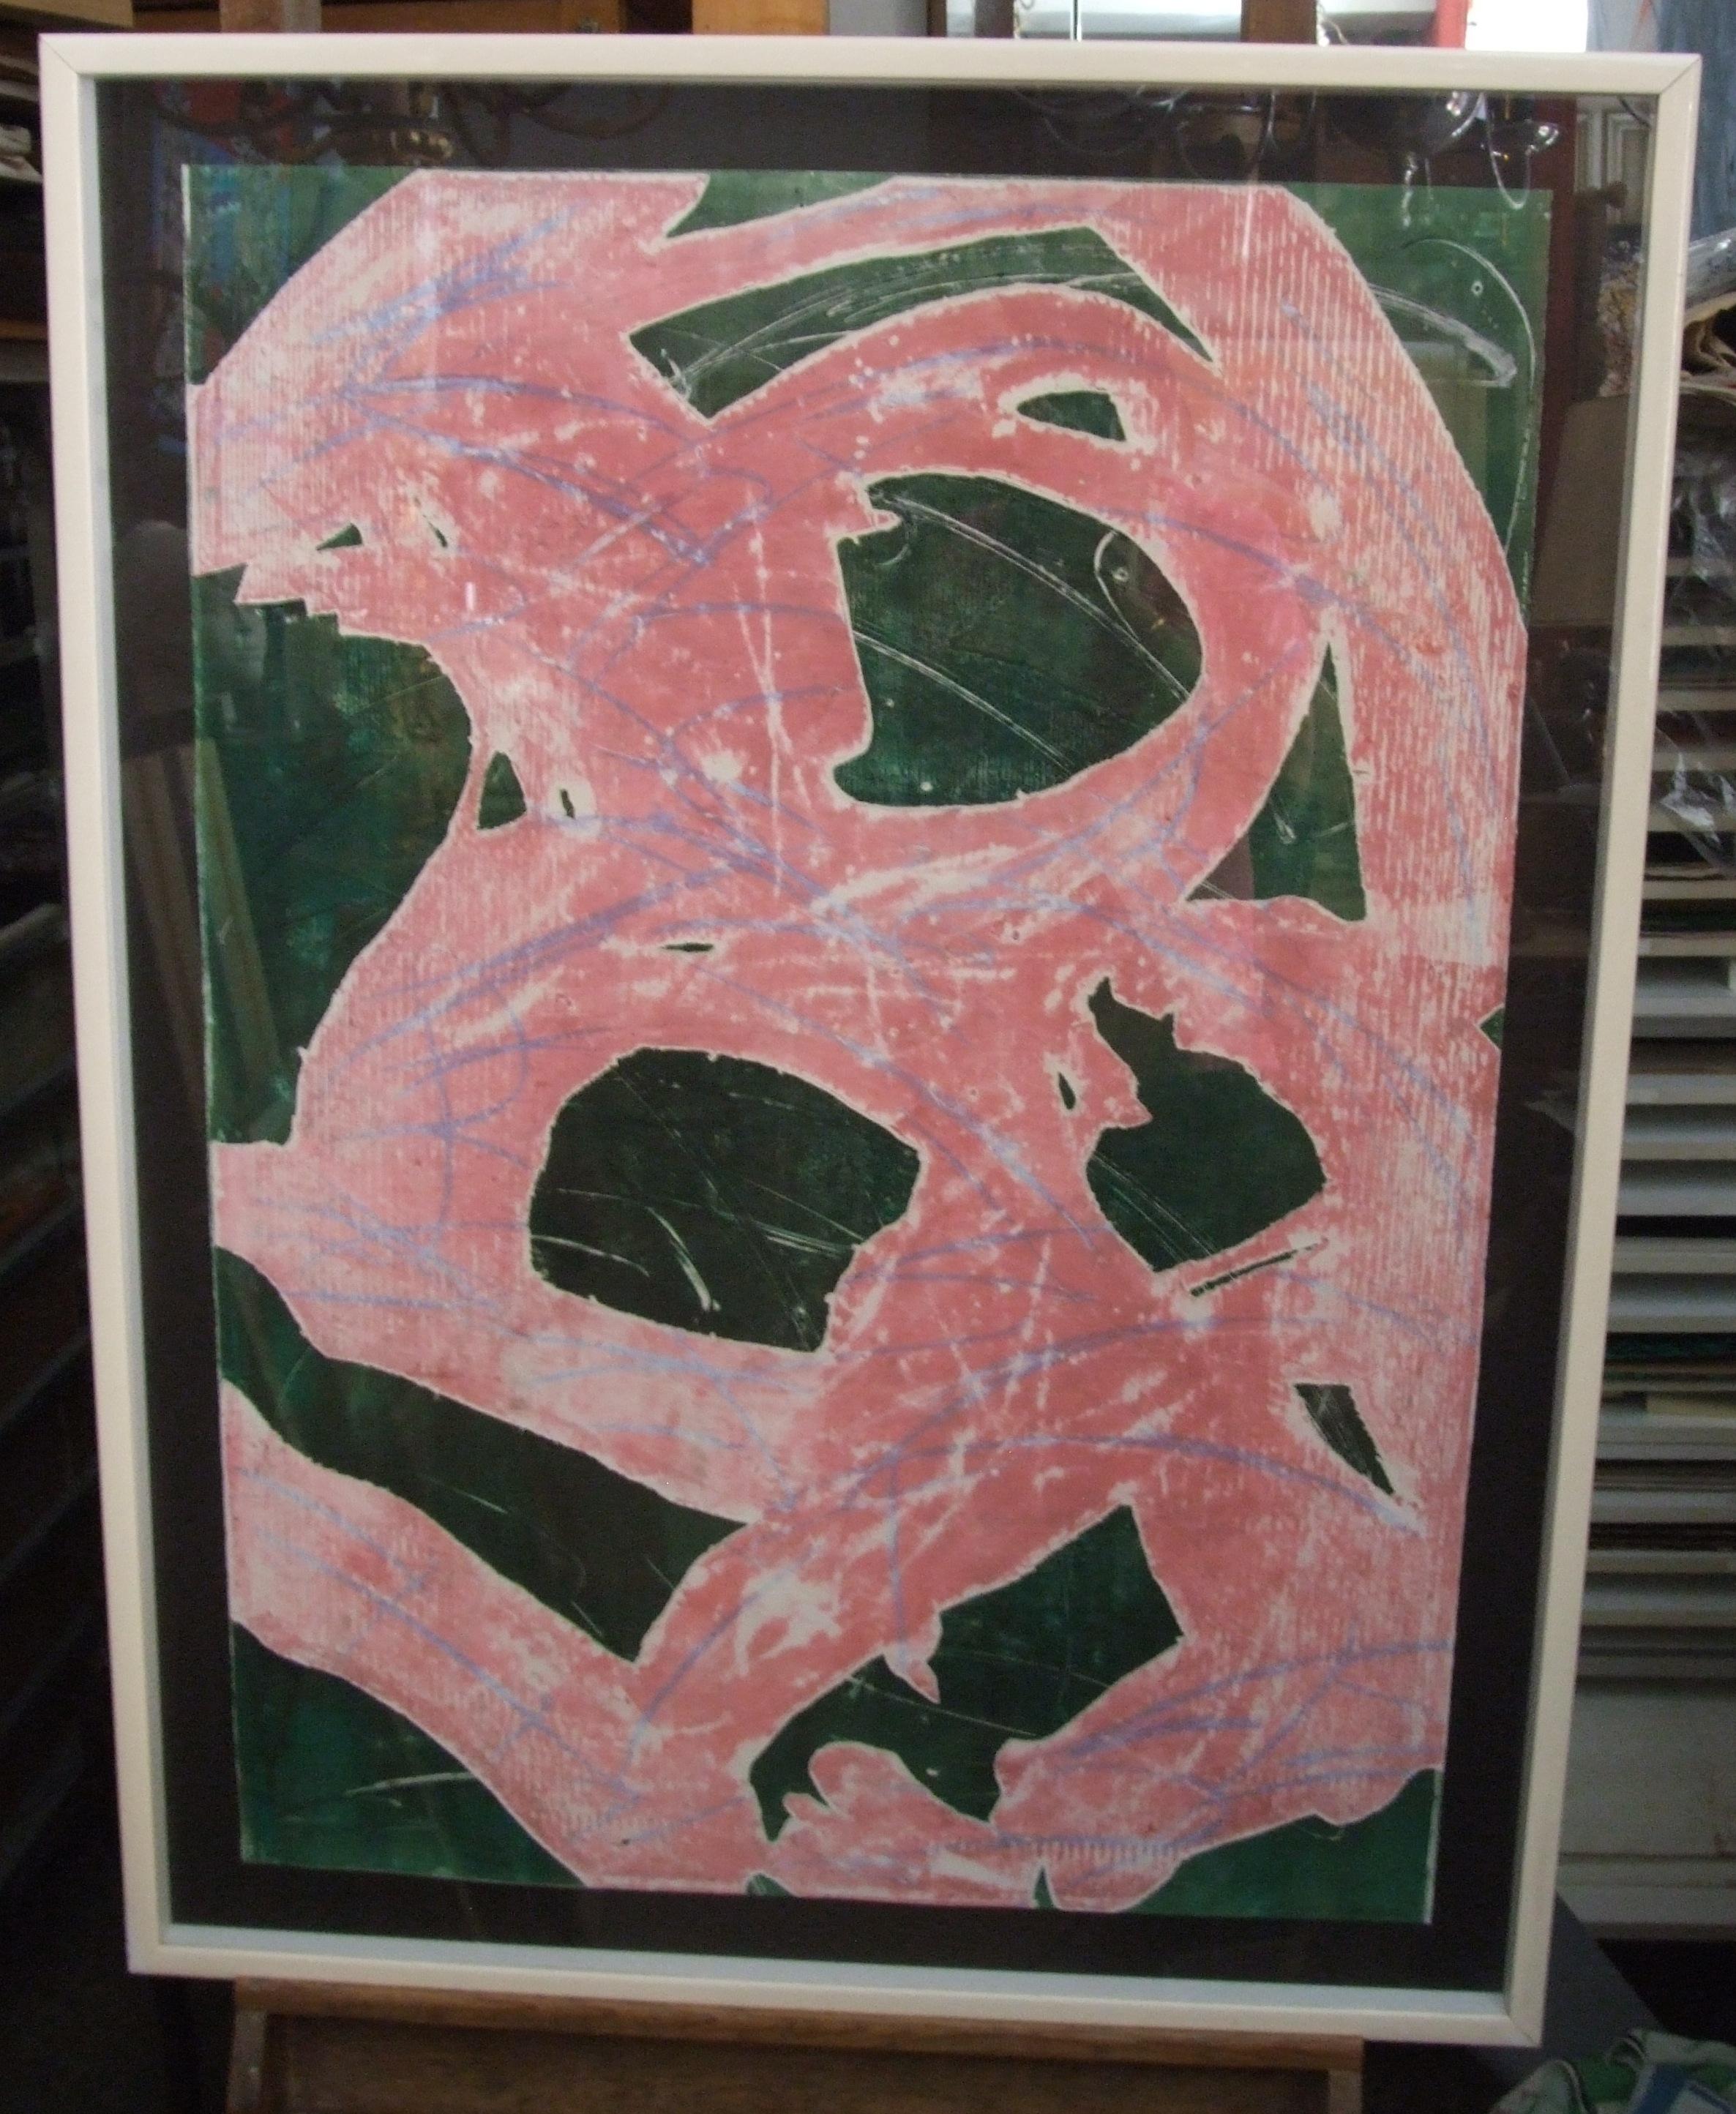 Gerard Seree Abstract Drawing - composition 1 - gouache on paper, 95x70 cm., framed